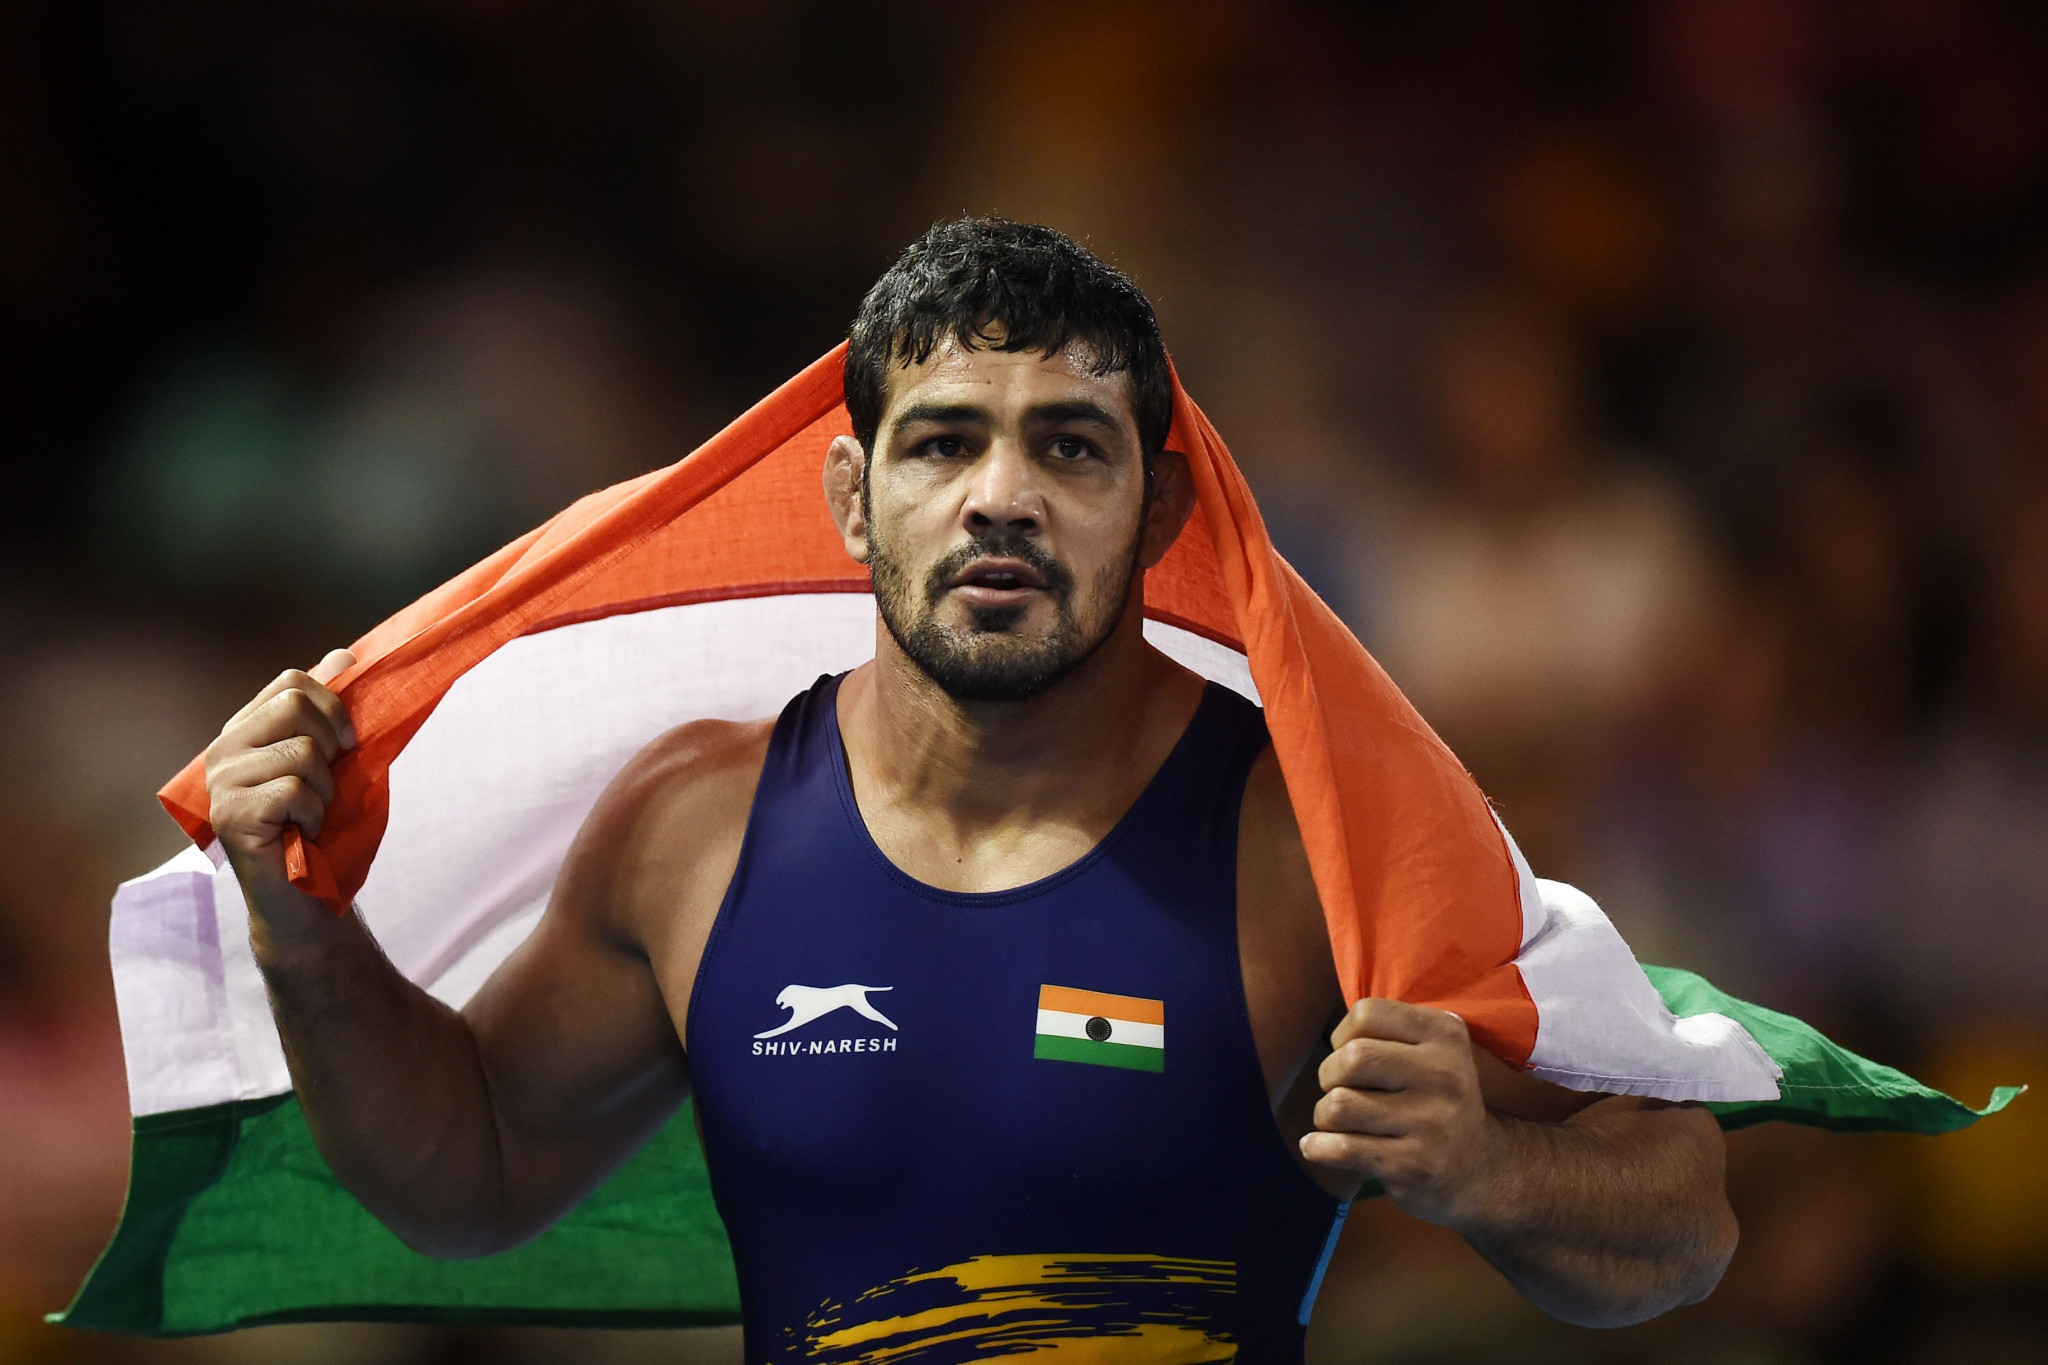 Indian wrestling legend Sushil Kumar has been charged with the murder of a rival ©Getty Images